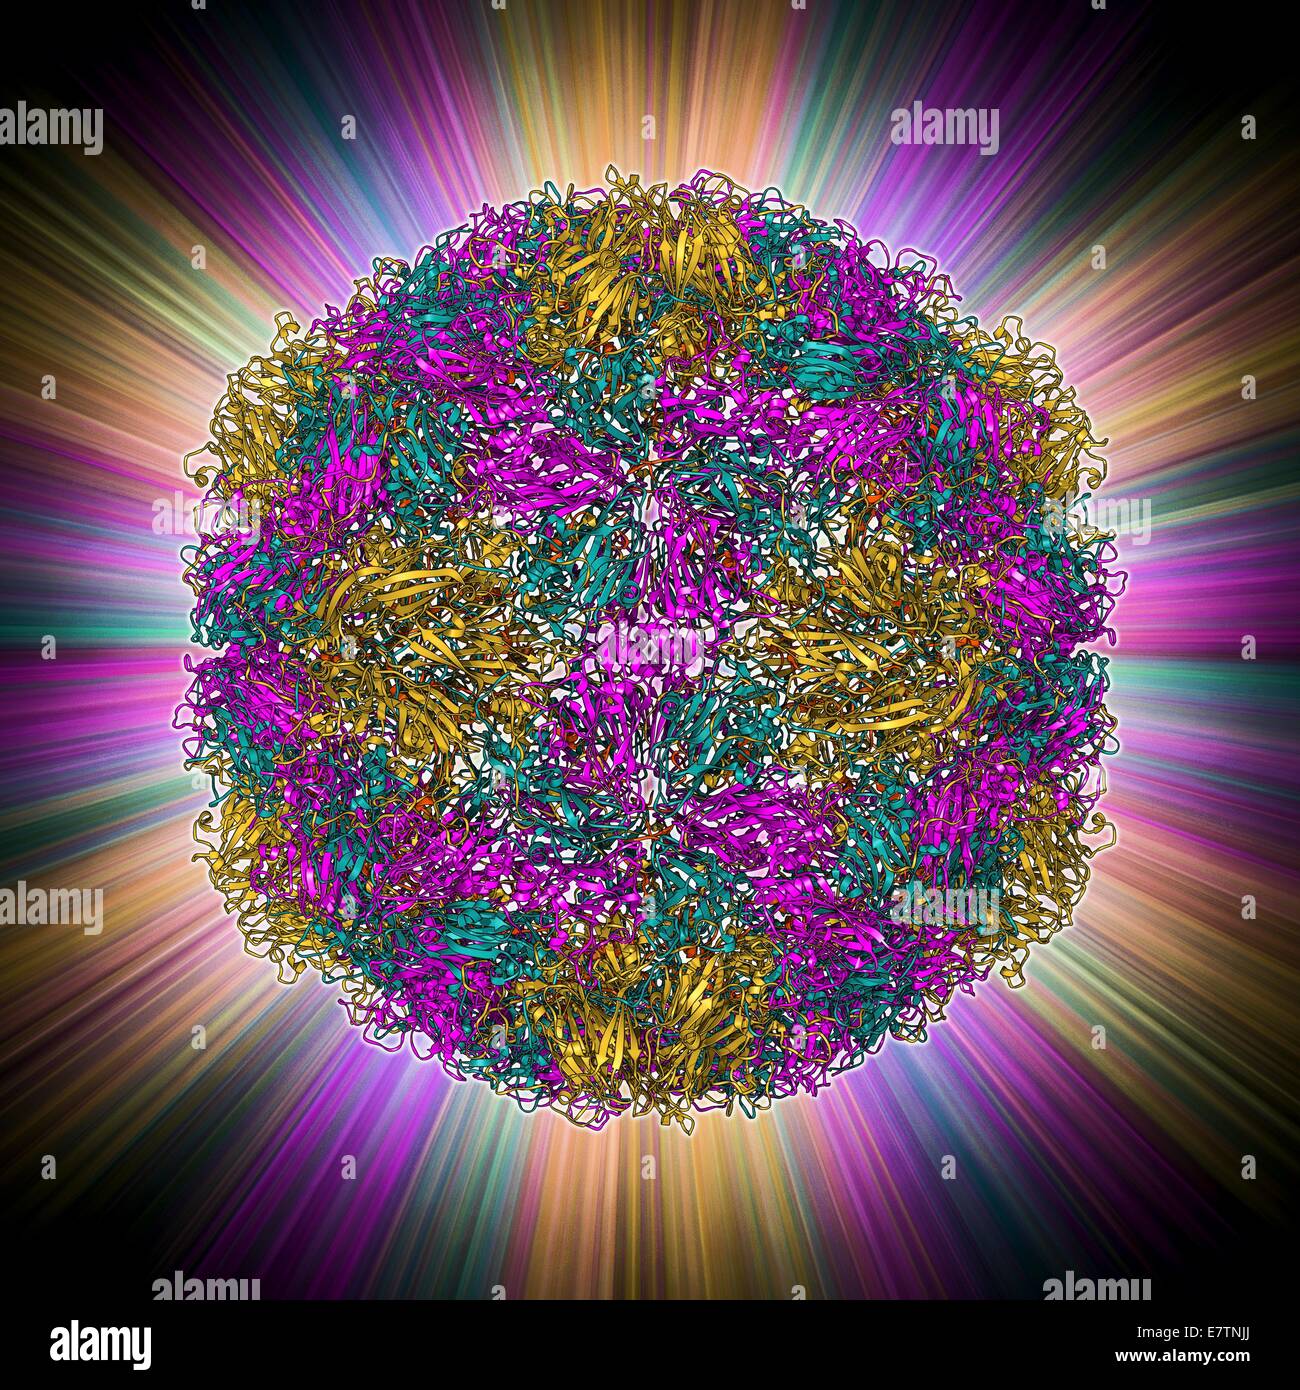 Rhinovirus capsid, molecular model. This is human rhinovirus. The rhinovirus infects the upper respiratory tract and is the cause of the common cold. It is spread by coughs and sneezes. In viruses, the capsid is the protein shell that encloses the genetic Stock Photo